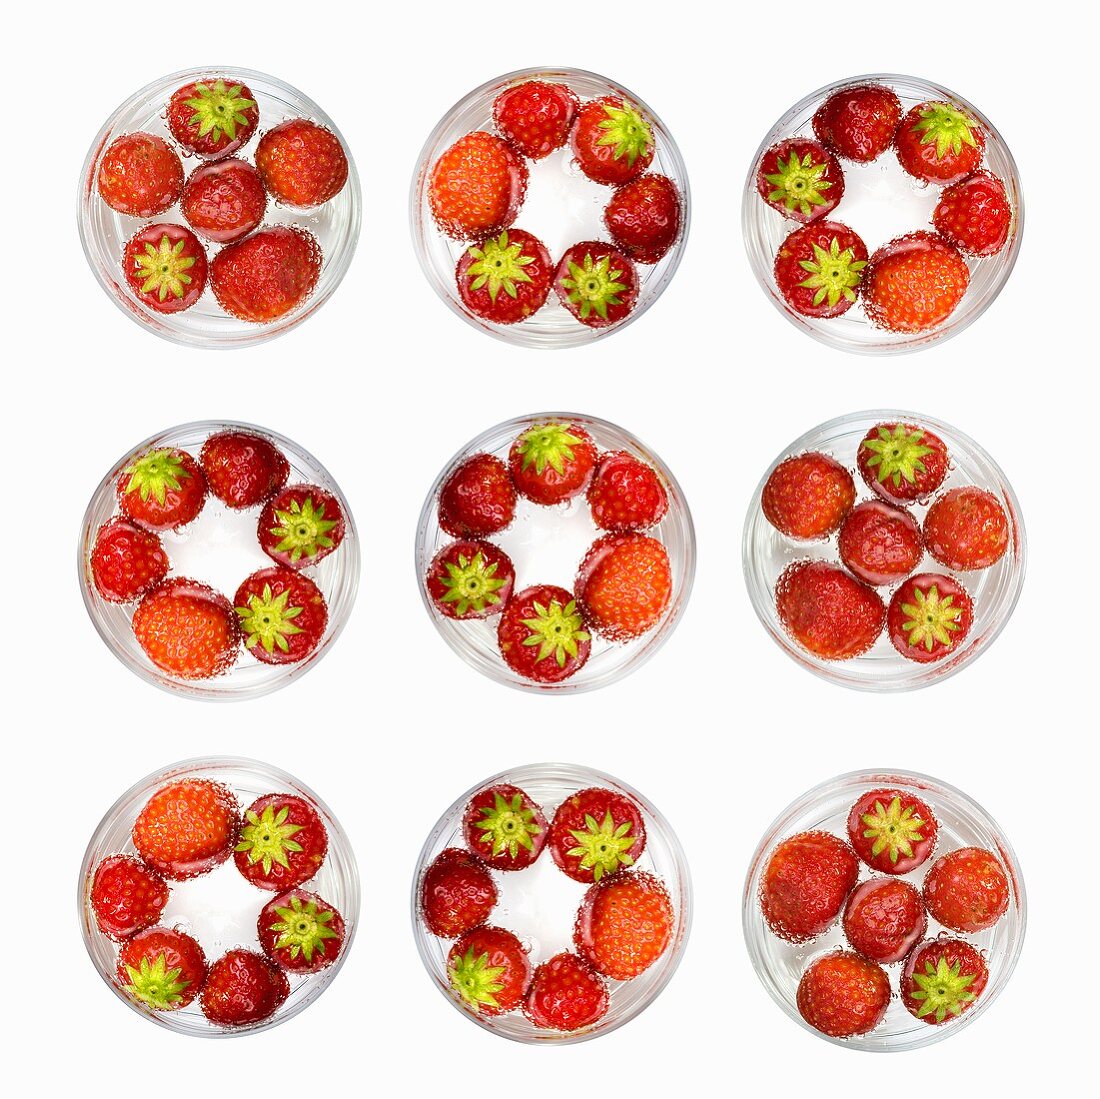 Several glasses of water with strawberries (from above)